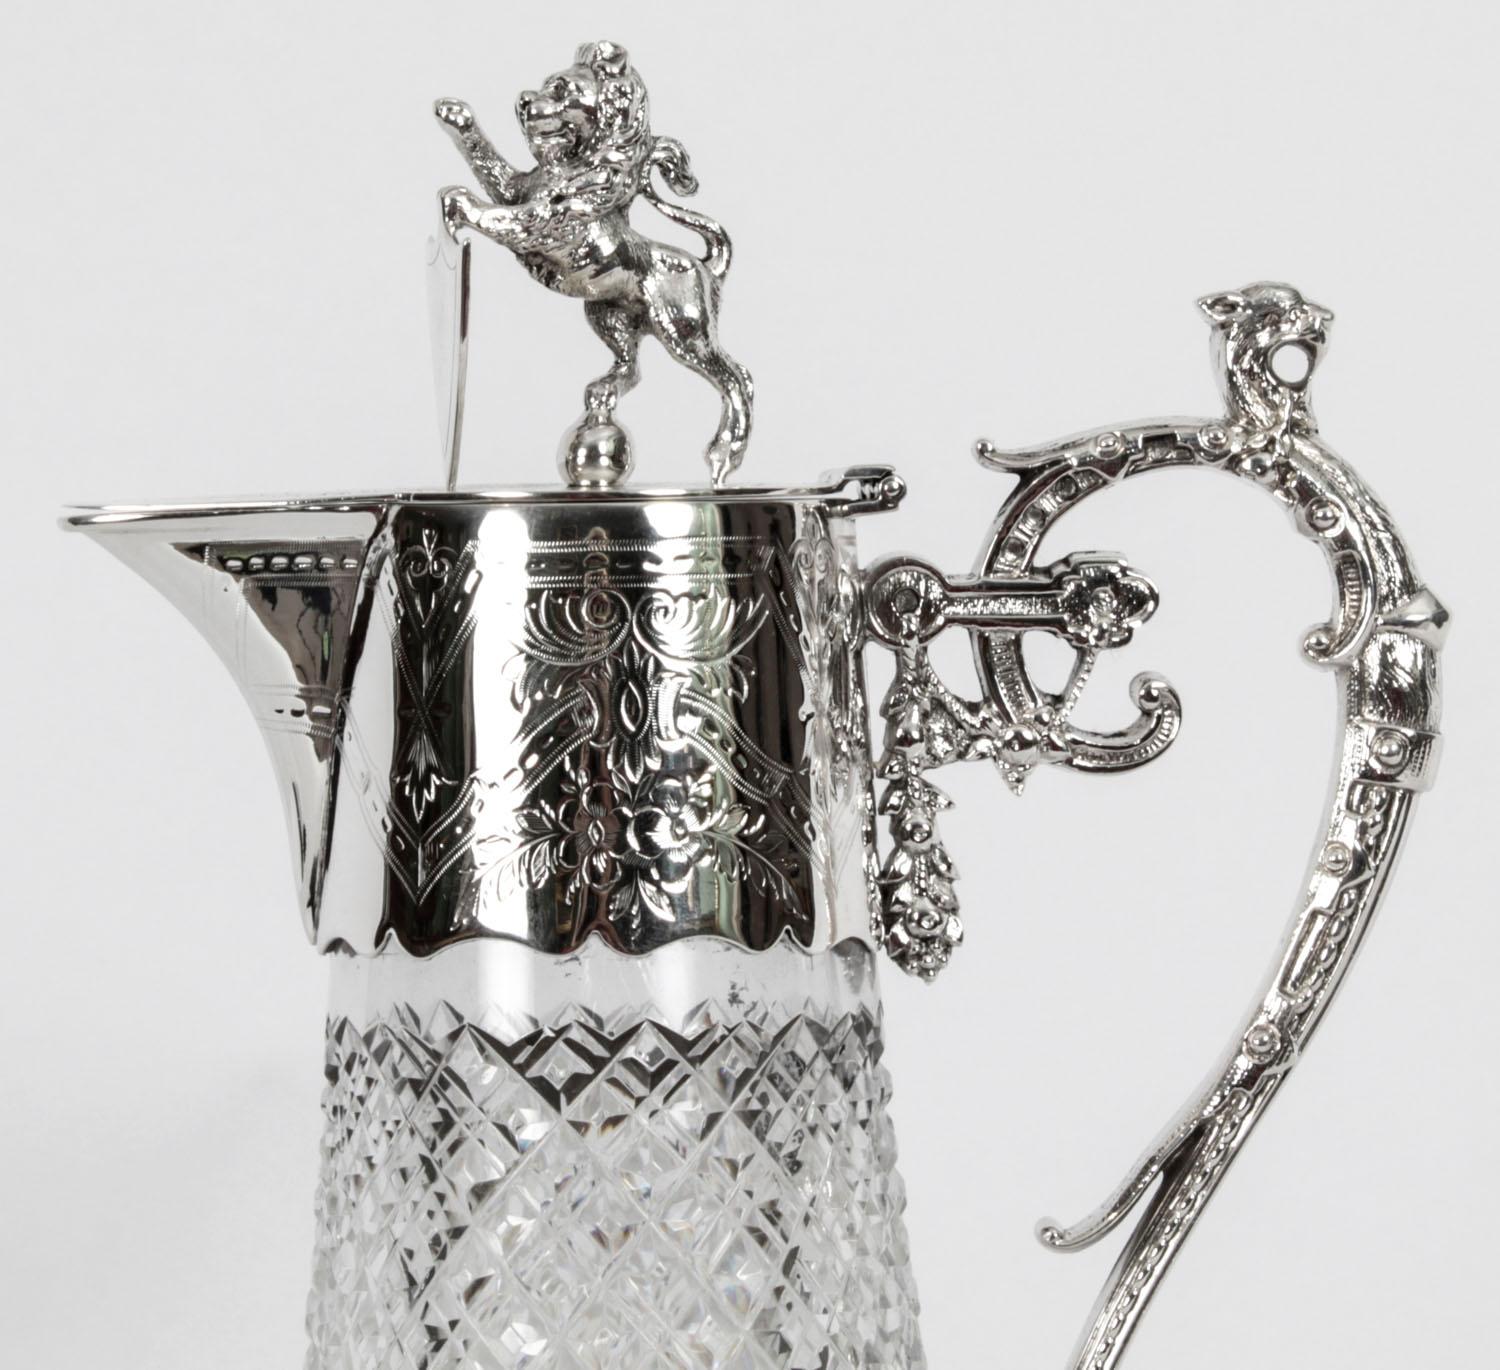 This is a wonderful Antique Victorian cut glass and silver plated claret jug,  Circa 1870 in date

The flared, diamond and prismatic cut glass body below a foliate chased mount, with lion and shield finial and an ornate scroll handle with leopard